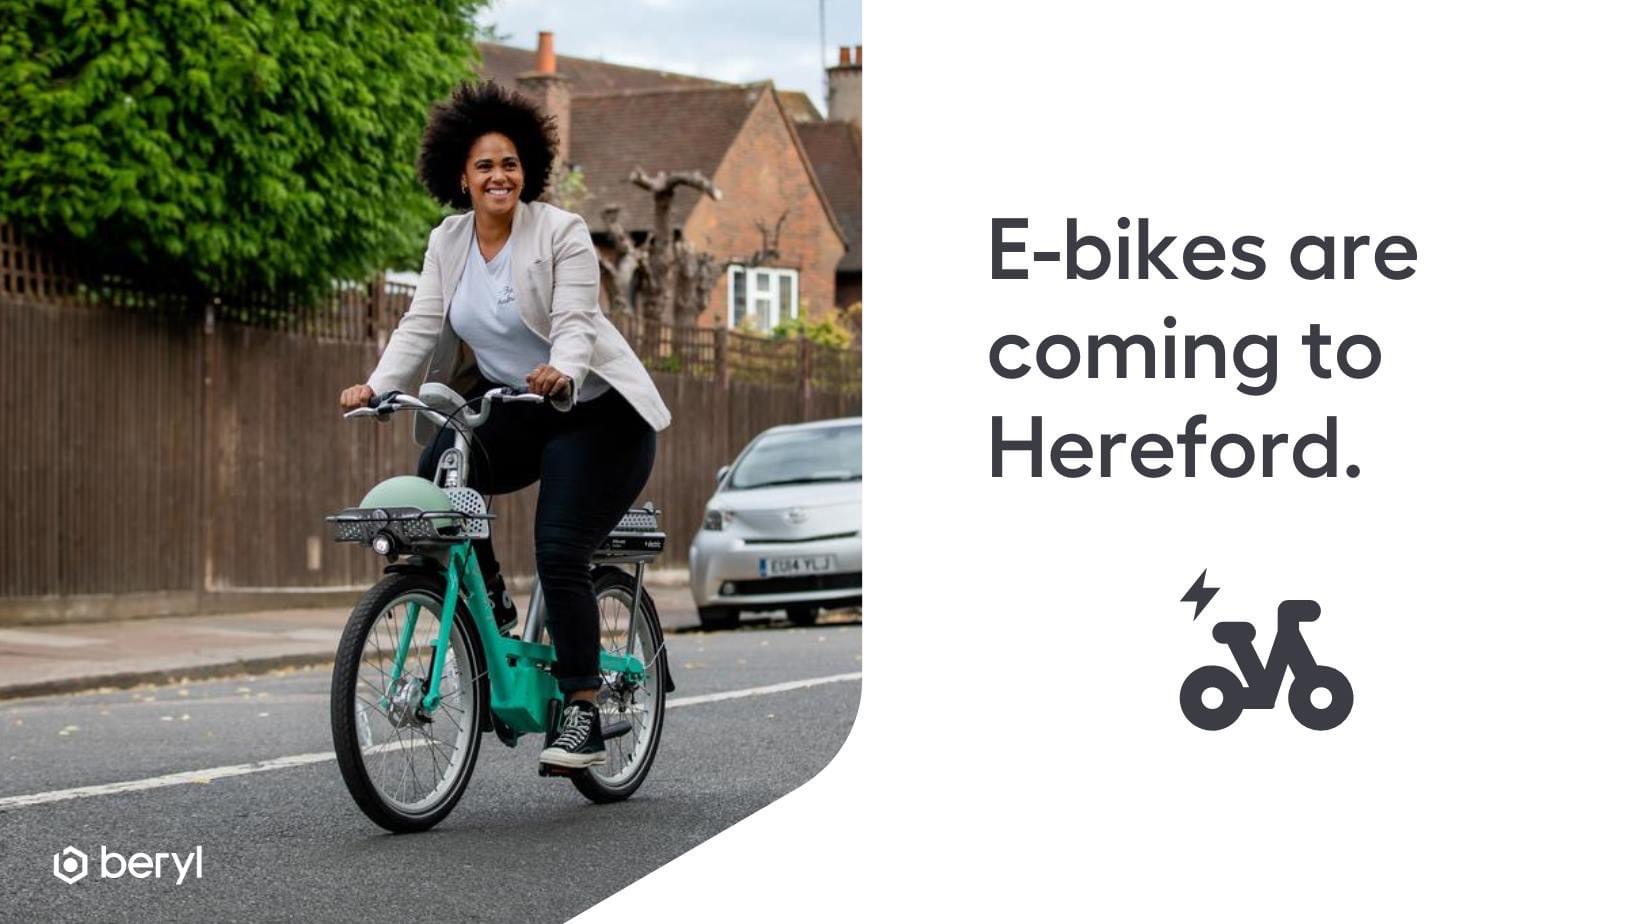 NEWS | Beryl E-bikes are coming to Hereford